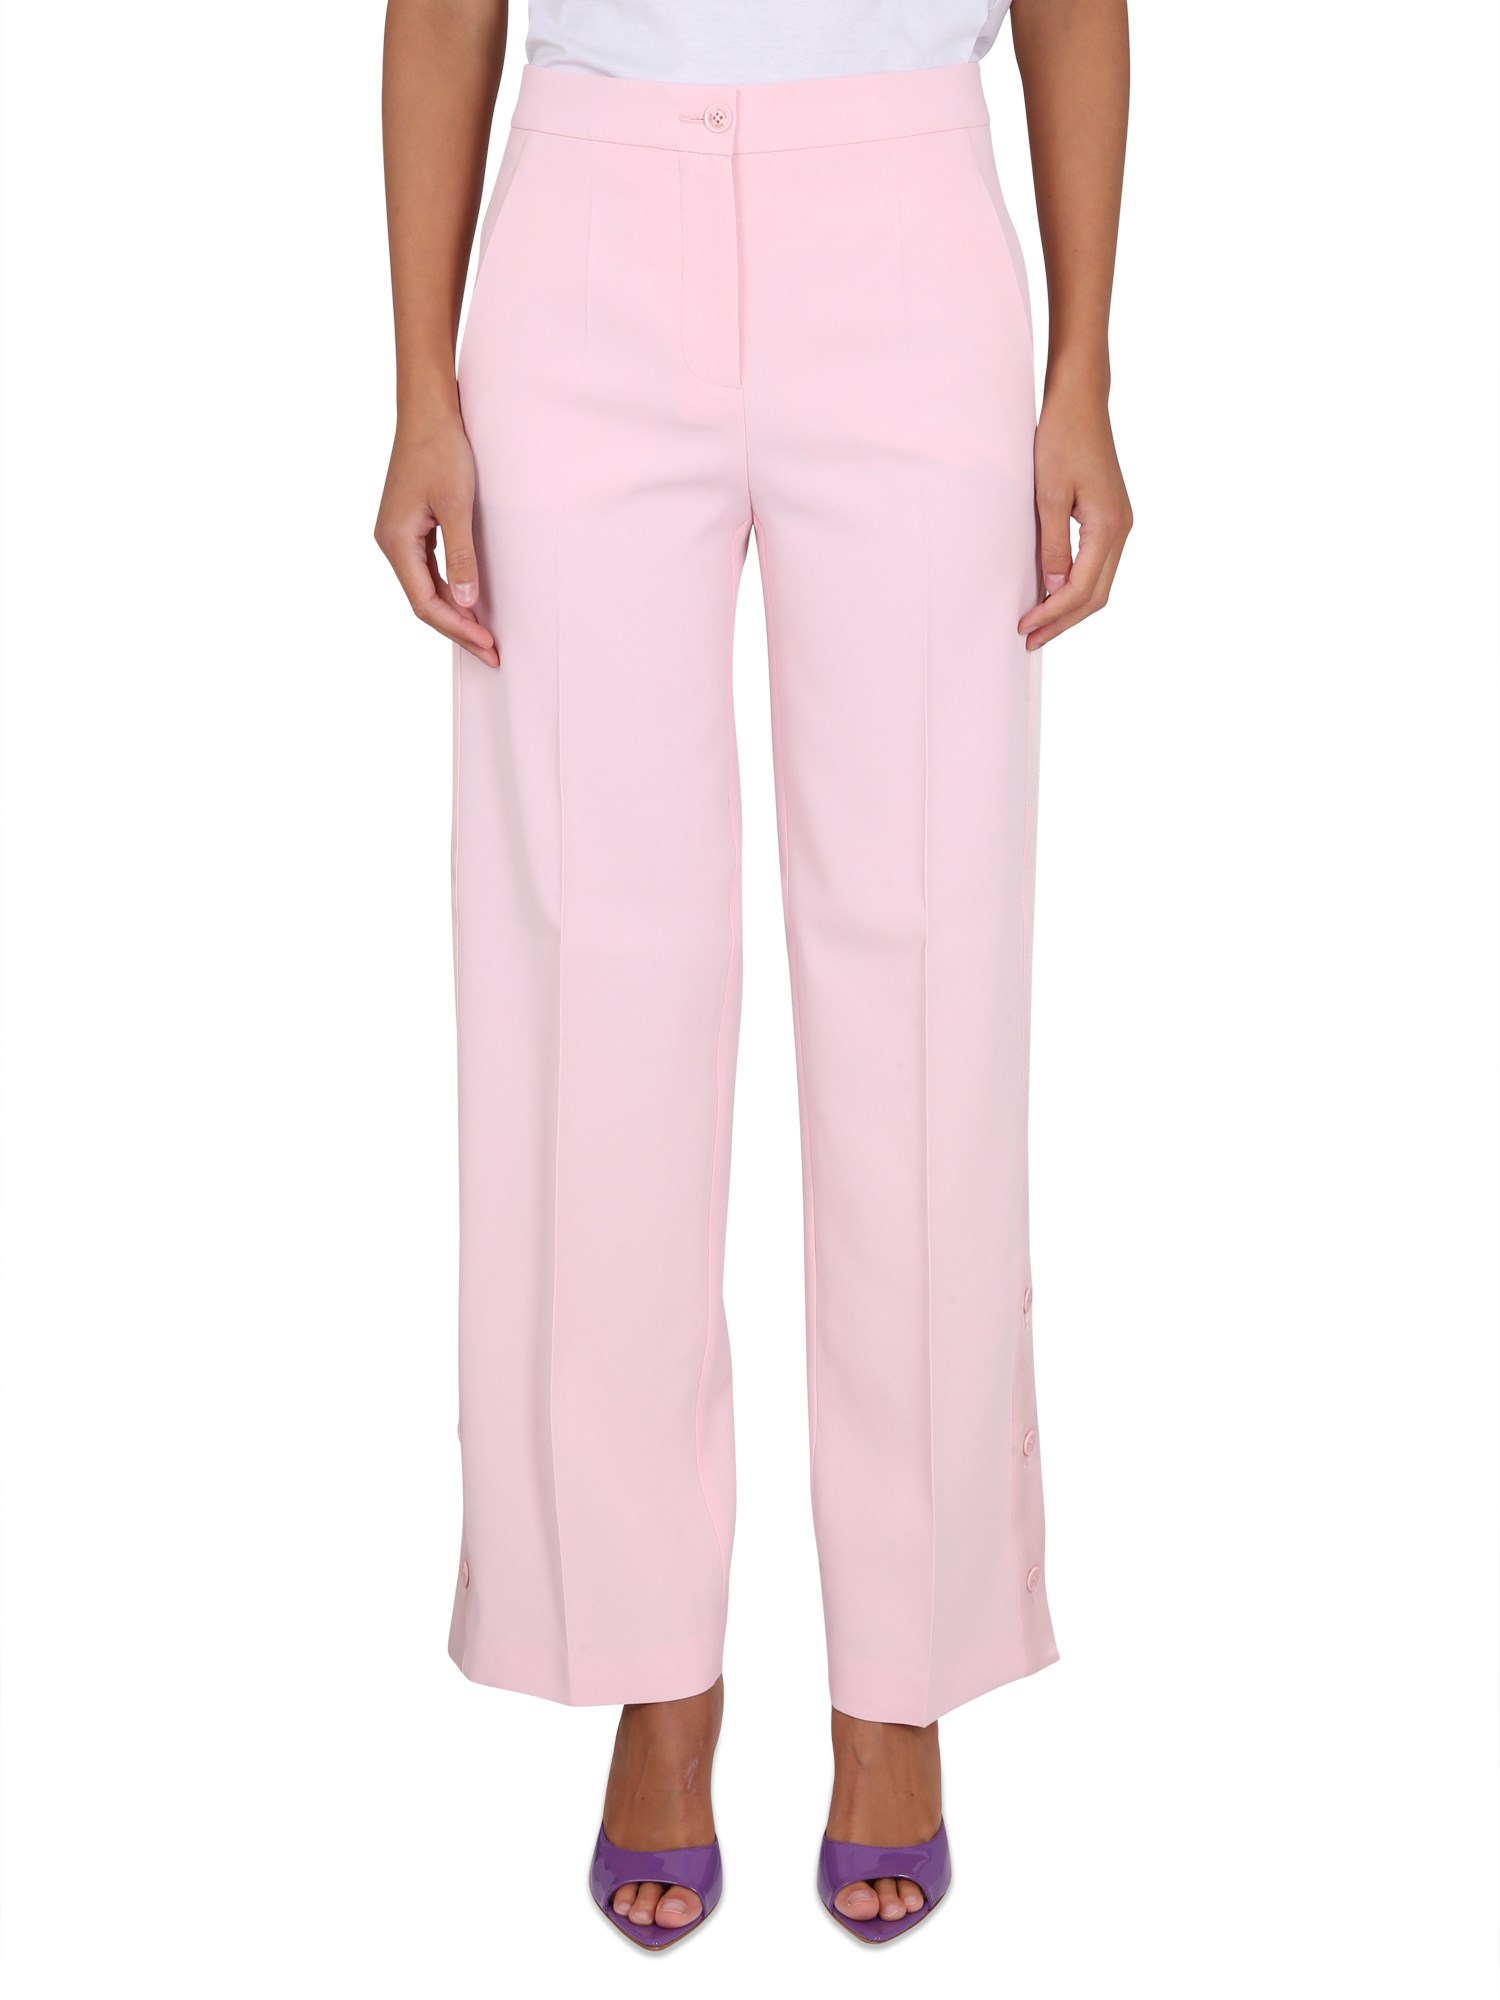 Boutique Moschino boutique moschino pants with buttons